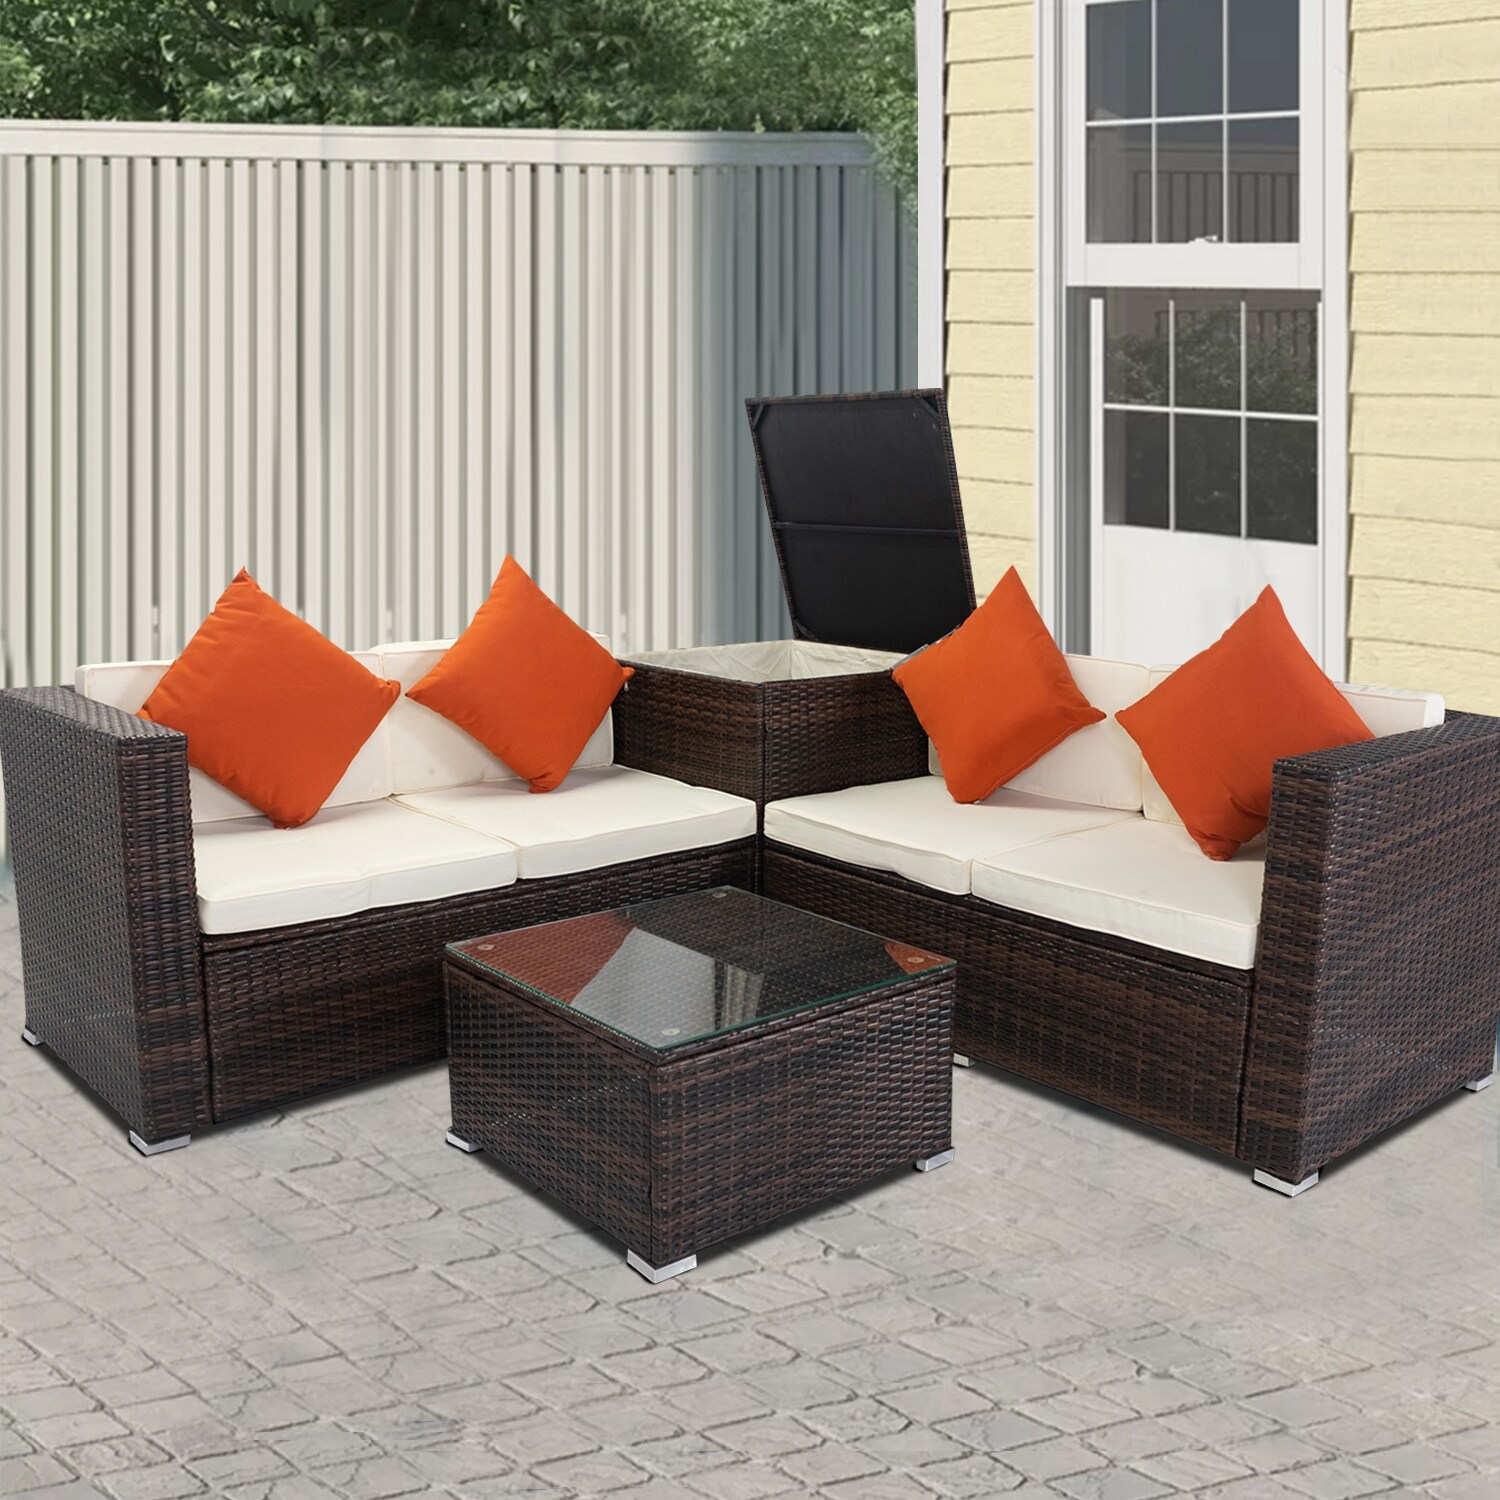 4 Piece Patio Sectional Wicker Rattan Outdoor Furniture Sofa Set with Storage Box | - Maincraft D01-PFS46